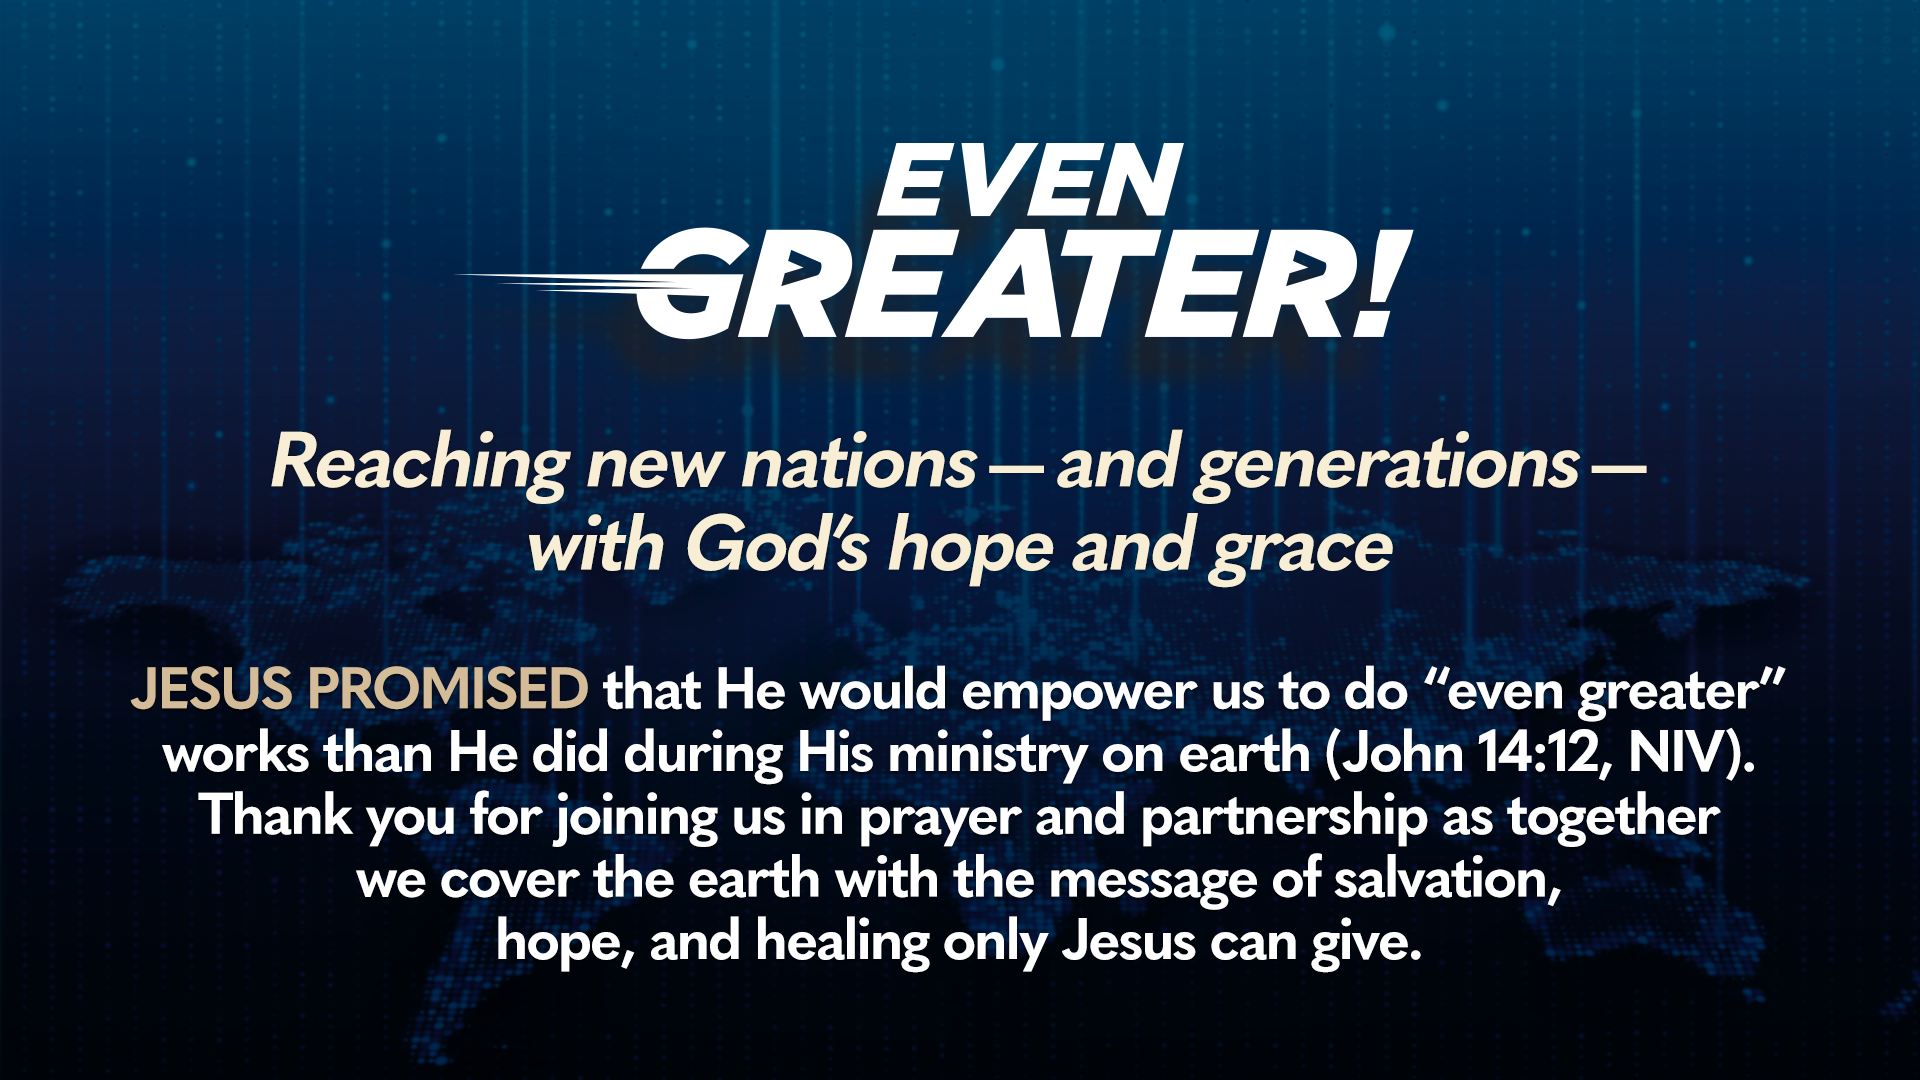 Reaching new nations- and generations- with God's hope and grace